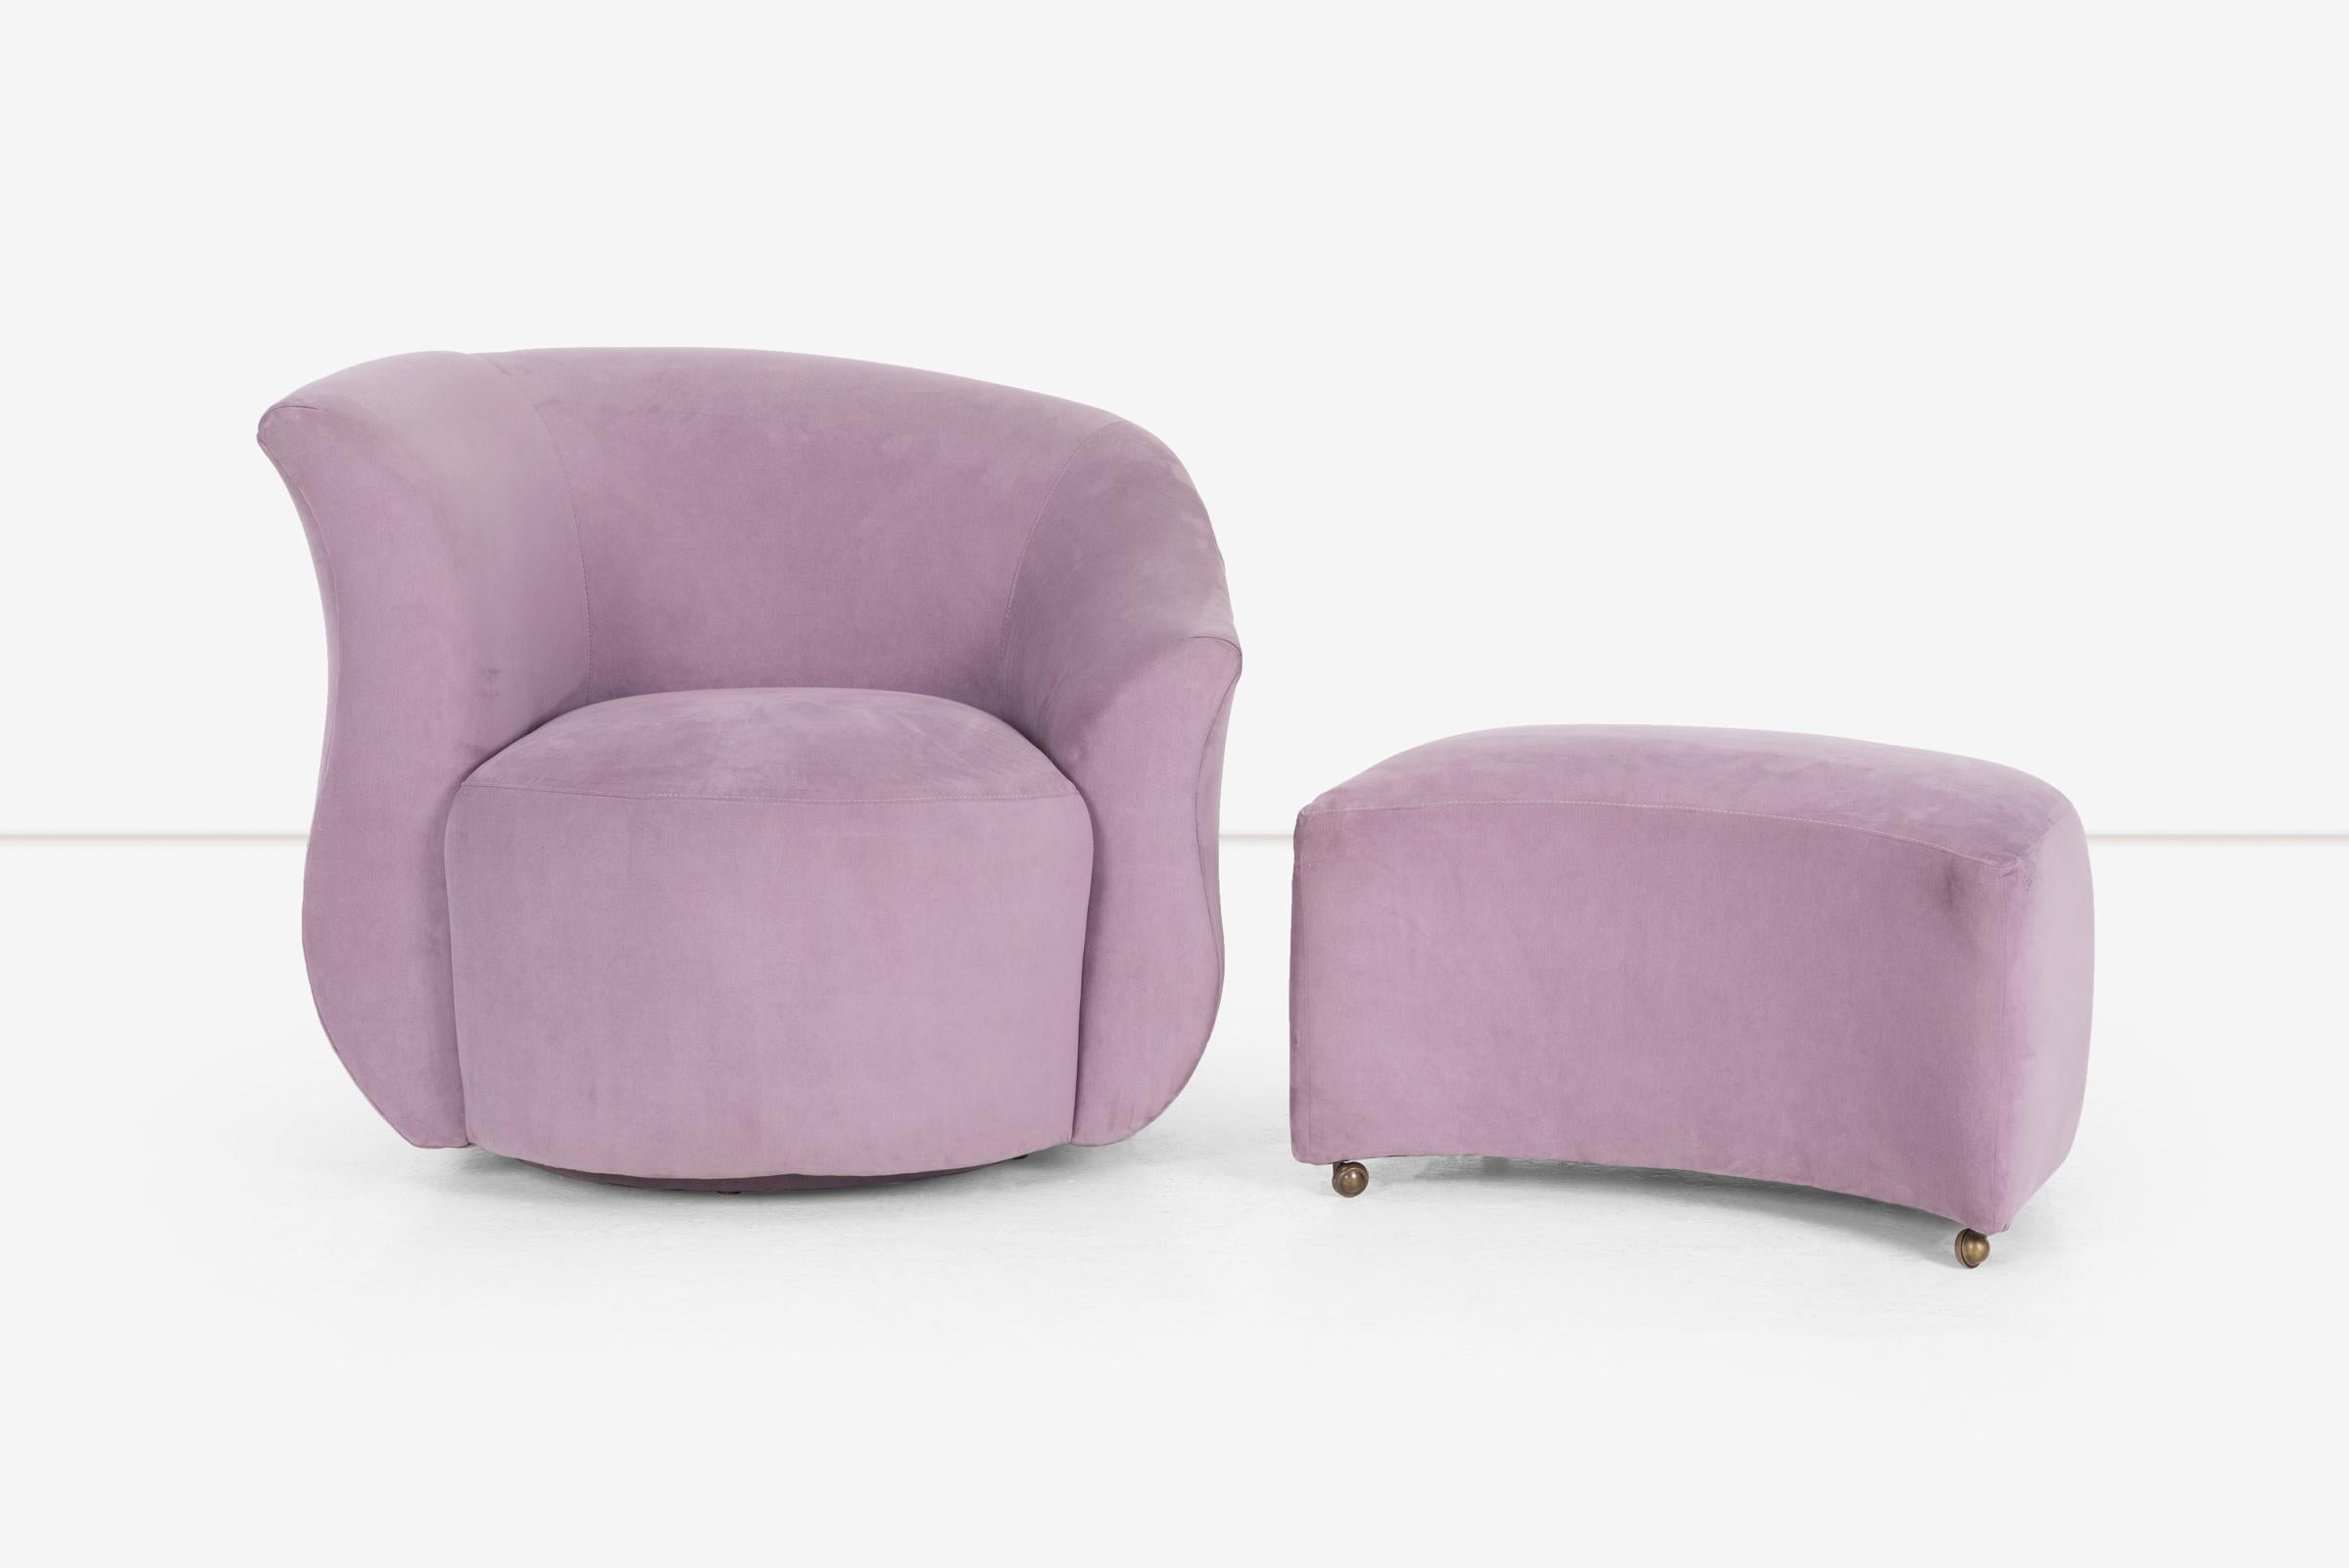 Asymmetric swivel set Lounge chair and ottoman on casters. Upholstered in a light purple ultra suede. Sound structural condition. Minor signs of scuffs and scrapes.

Dimensions
H: 31.5